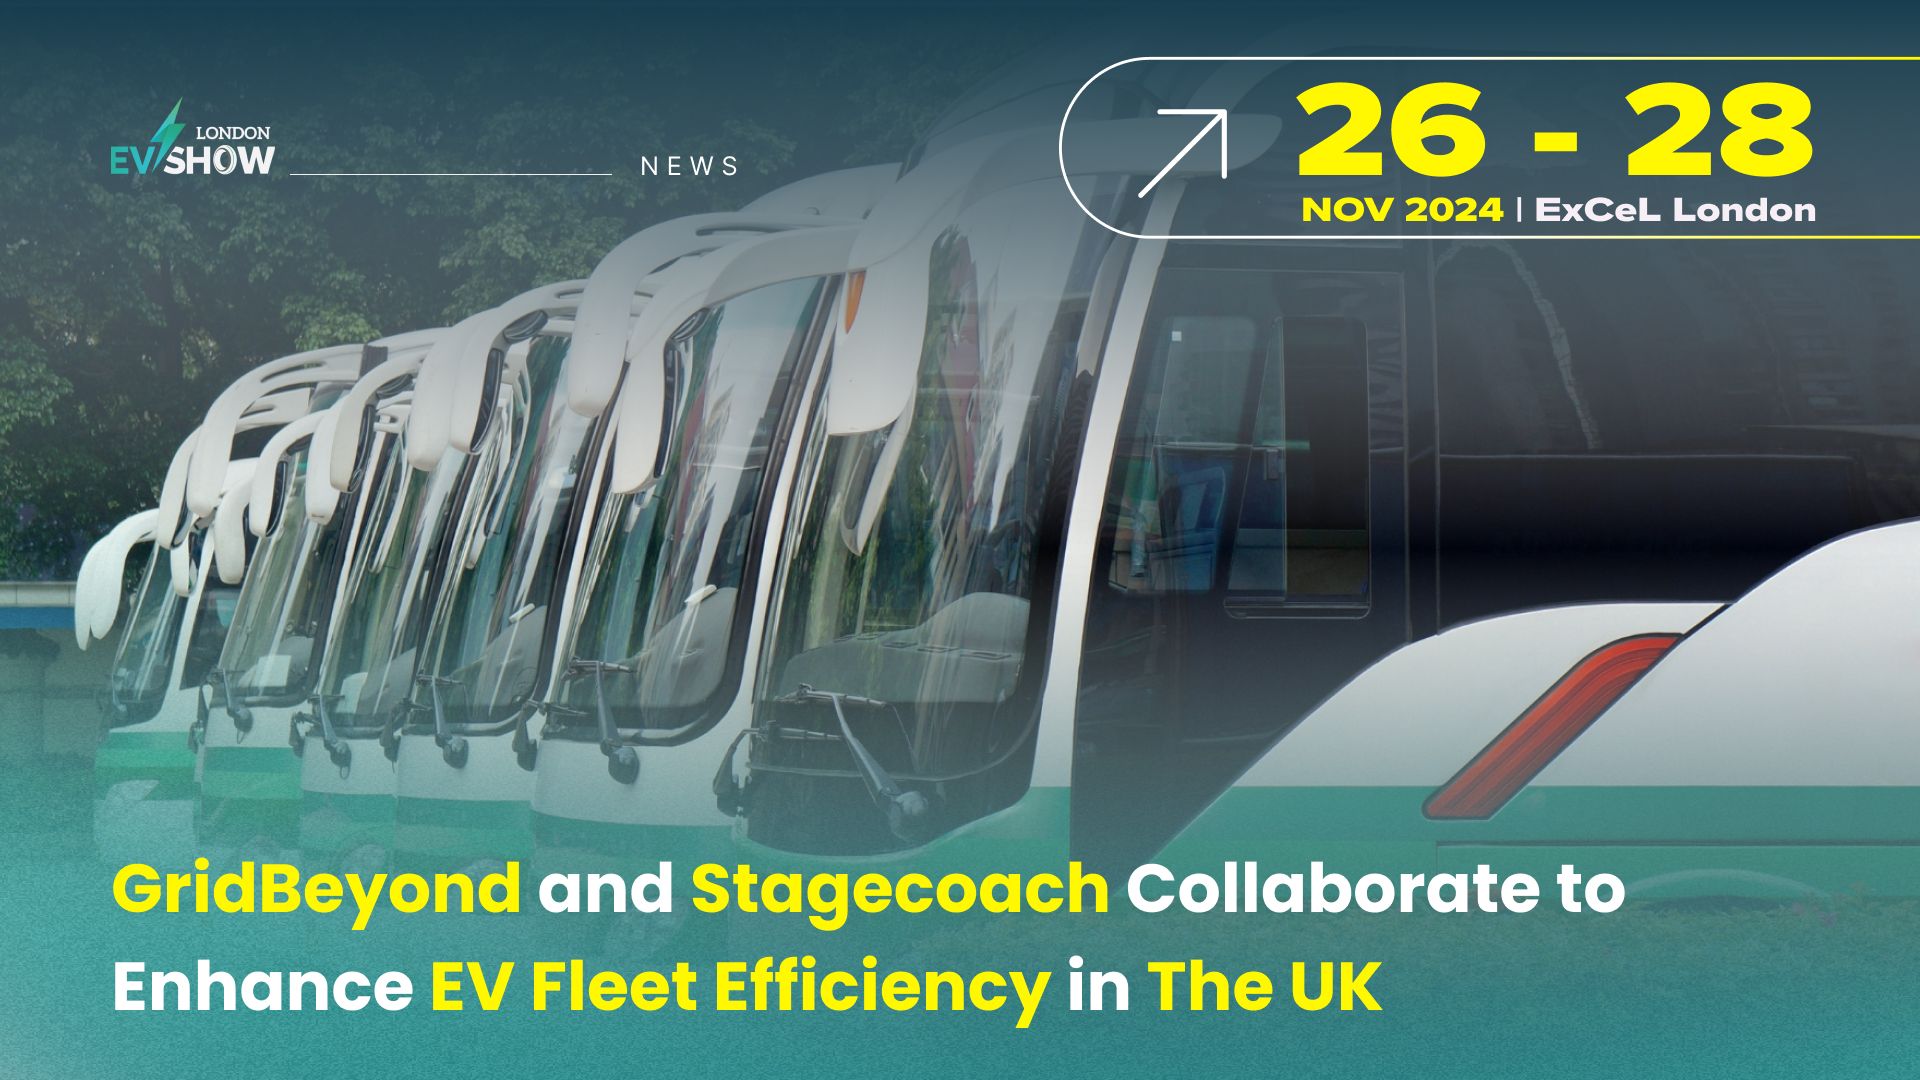 GridBeyond and Stagecoach Collaborate To Enhance EV Fleet Efficiency In The UK